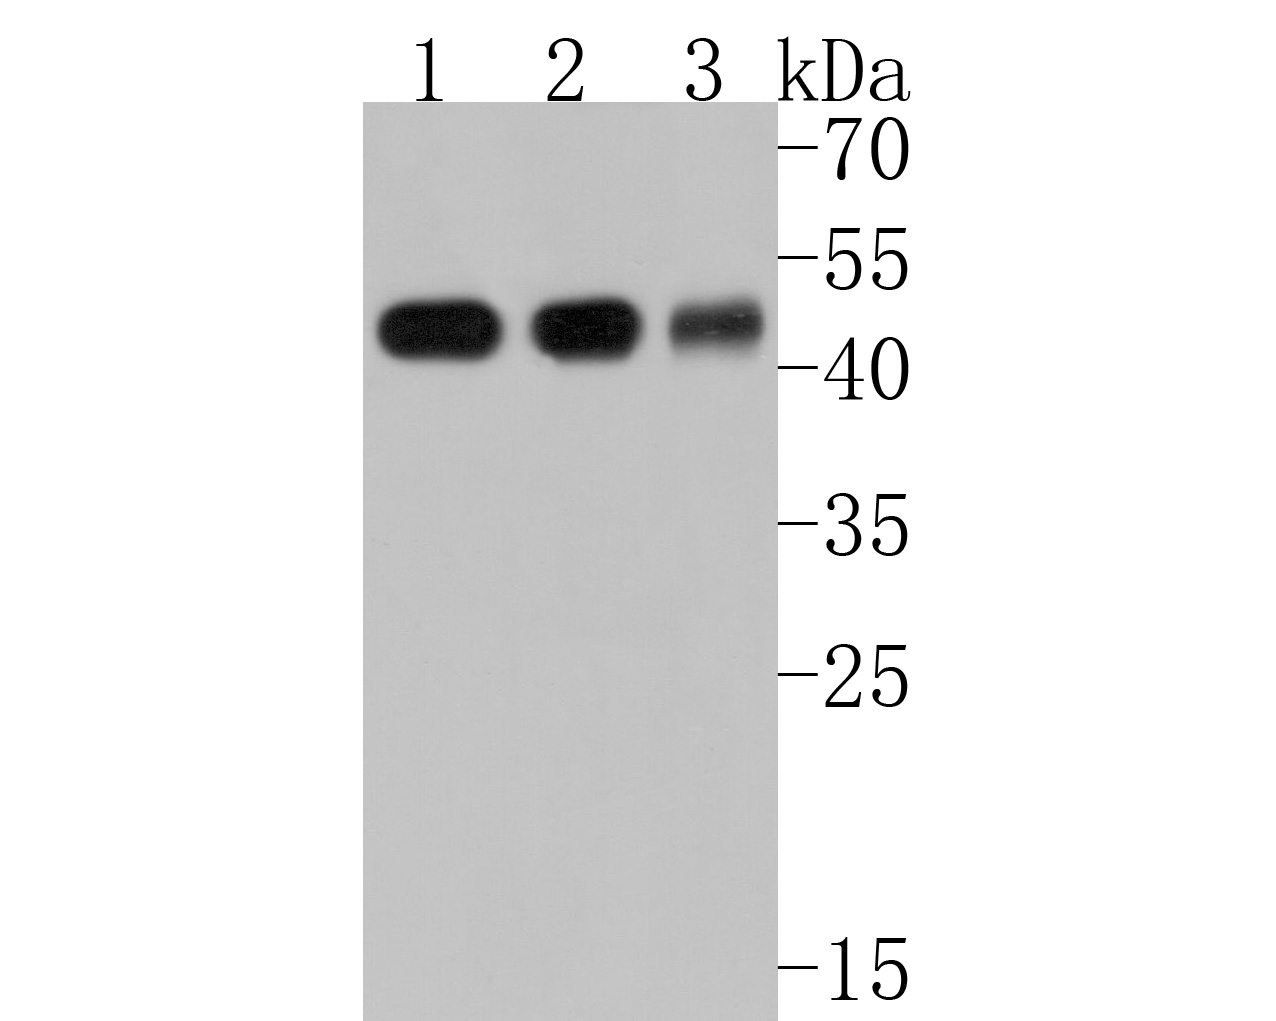 Western blot analysis of MAT1A on different lysates. Proteins were transferred to a PVDF membrane and blocked with 5% BSA in PBS for 1 hour at room temperature. The primary antibody (HA500232, 1/5,000) was used in 5% BSA at room temperature for 2 hours. Goat Anti-Rabbit IgG - HRP Secondary Antibody (HA1001) at 1:200,000 dilution was used for 1 hour at room temperature.<br />
Positive control: <br />
Lane 1: Mouse liver tissue lysate<br />
Lane 2: Rat liver tissue lysate<br />
Lane 3: Human liver tissue lysate